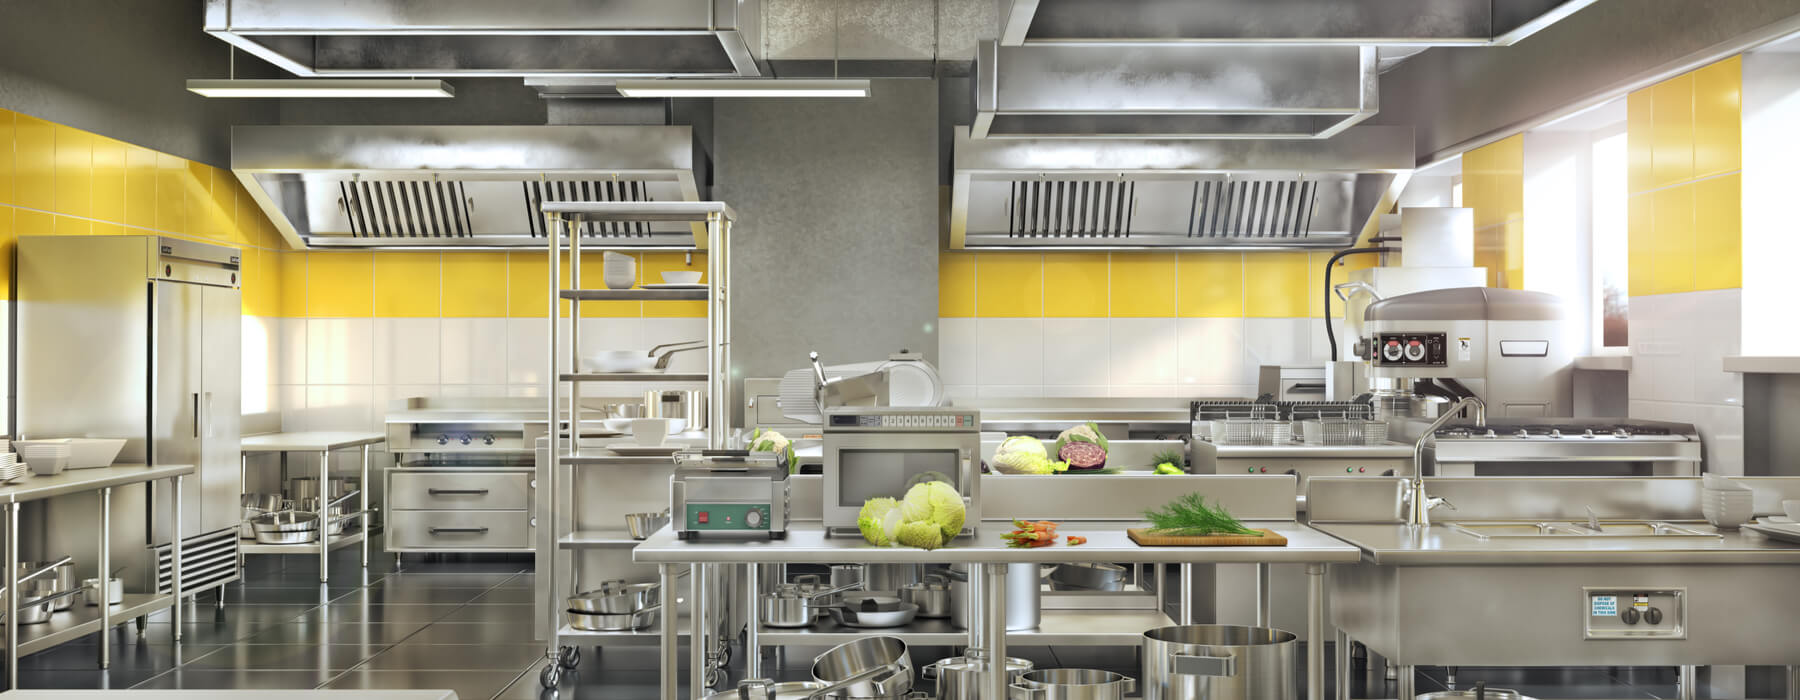 Are You in the Restaurant Business? 3 Benefits of Using Ghost Kitchens